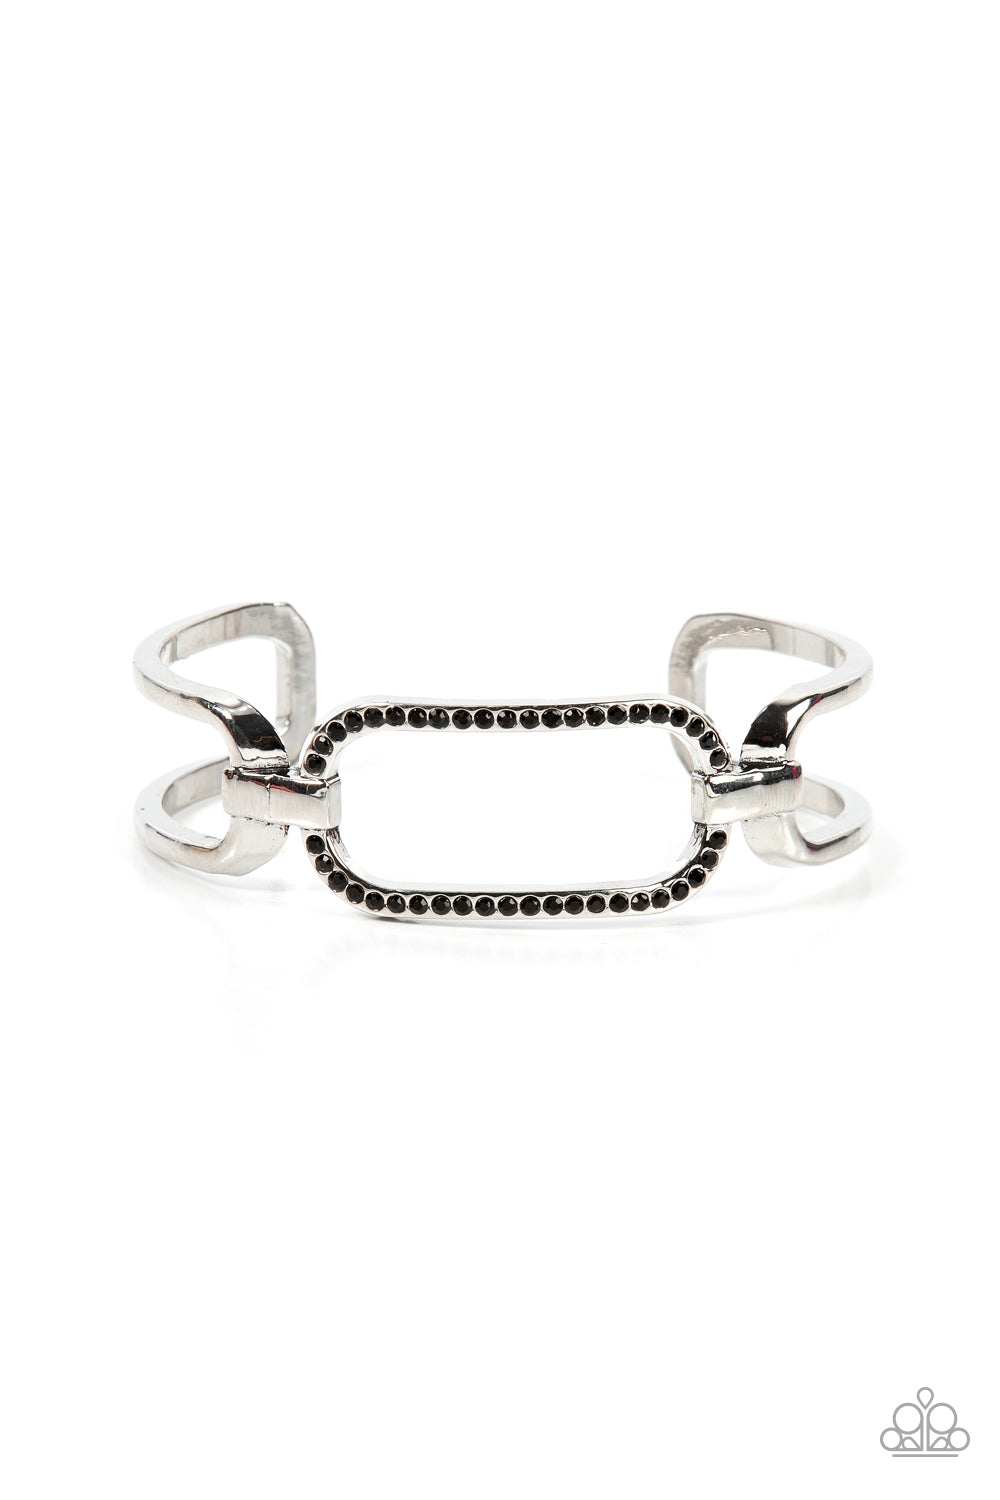 Civic Chic - Black and Silver Bracelet - Paparazzi Accessories Bejeweled Accessories By Kristie